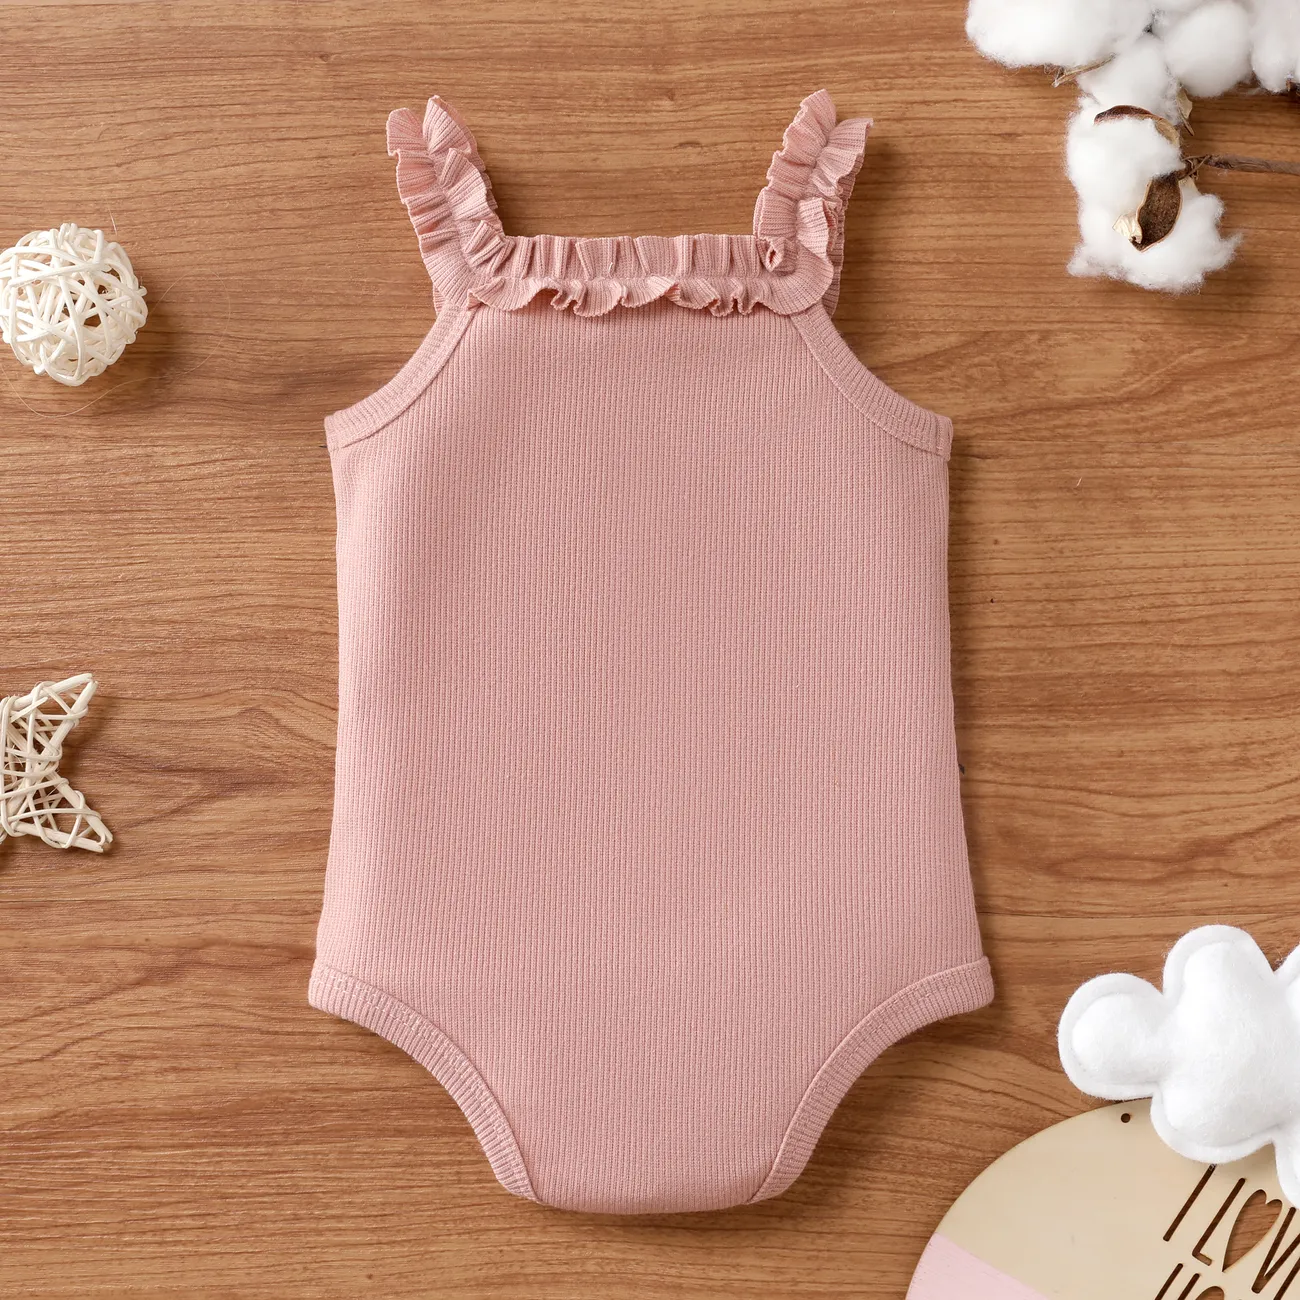  Baby Girl Cute Sleeveless Romper with Agaric Edge  Mauve Pink big image 1